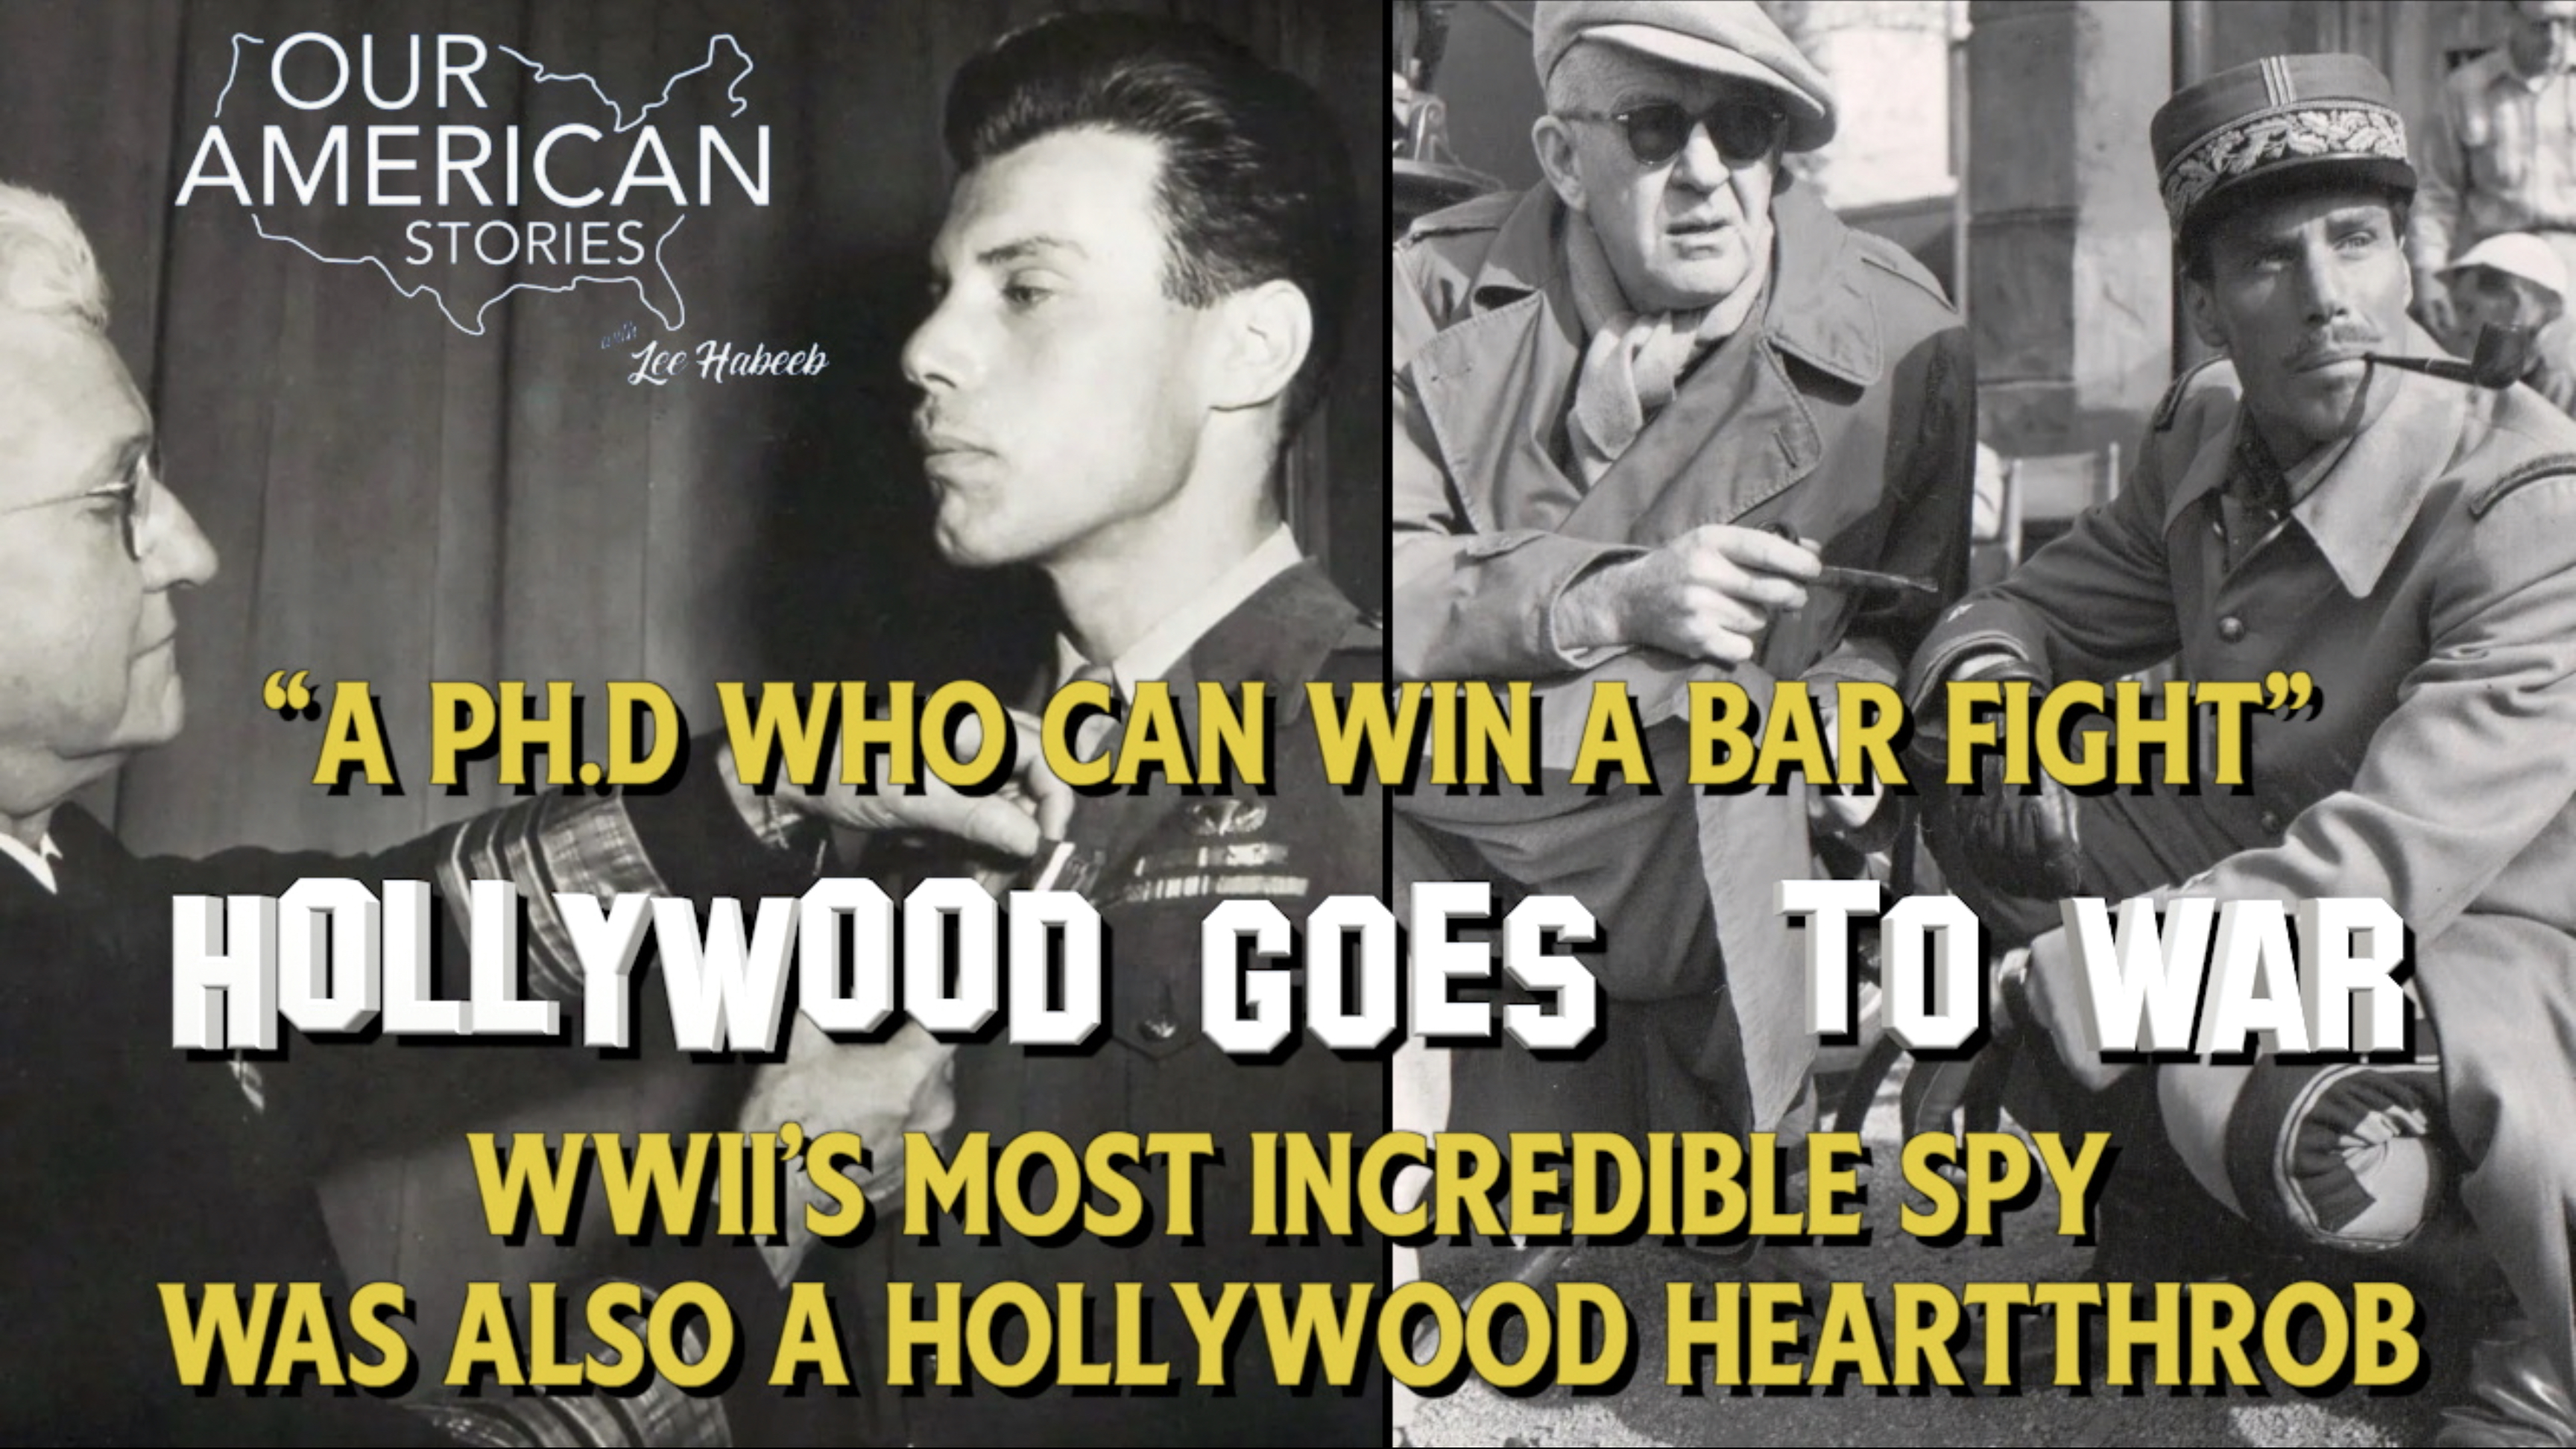 “A Ph.D Who Can Win A Bar Fight”—WWII’s Most Incredible Spy Was Also a Hollywood Heartthrob: The Story of Peter Ortiz (Hollywood Goes to War)